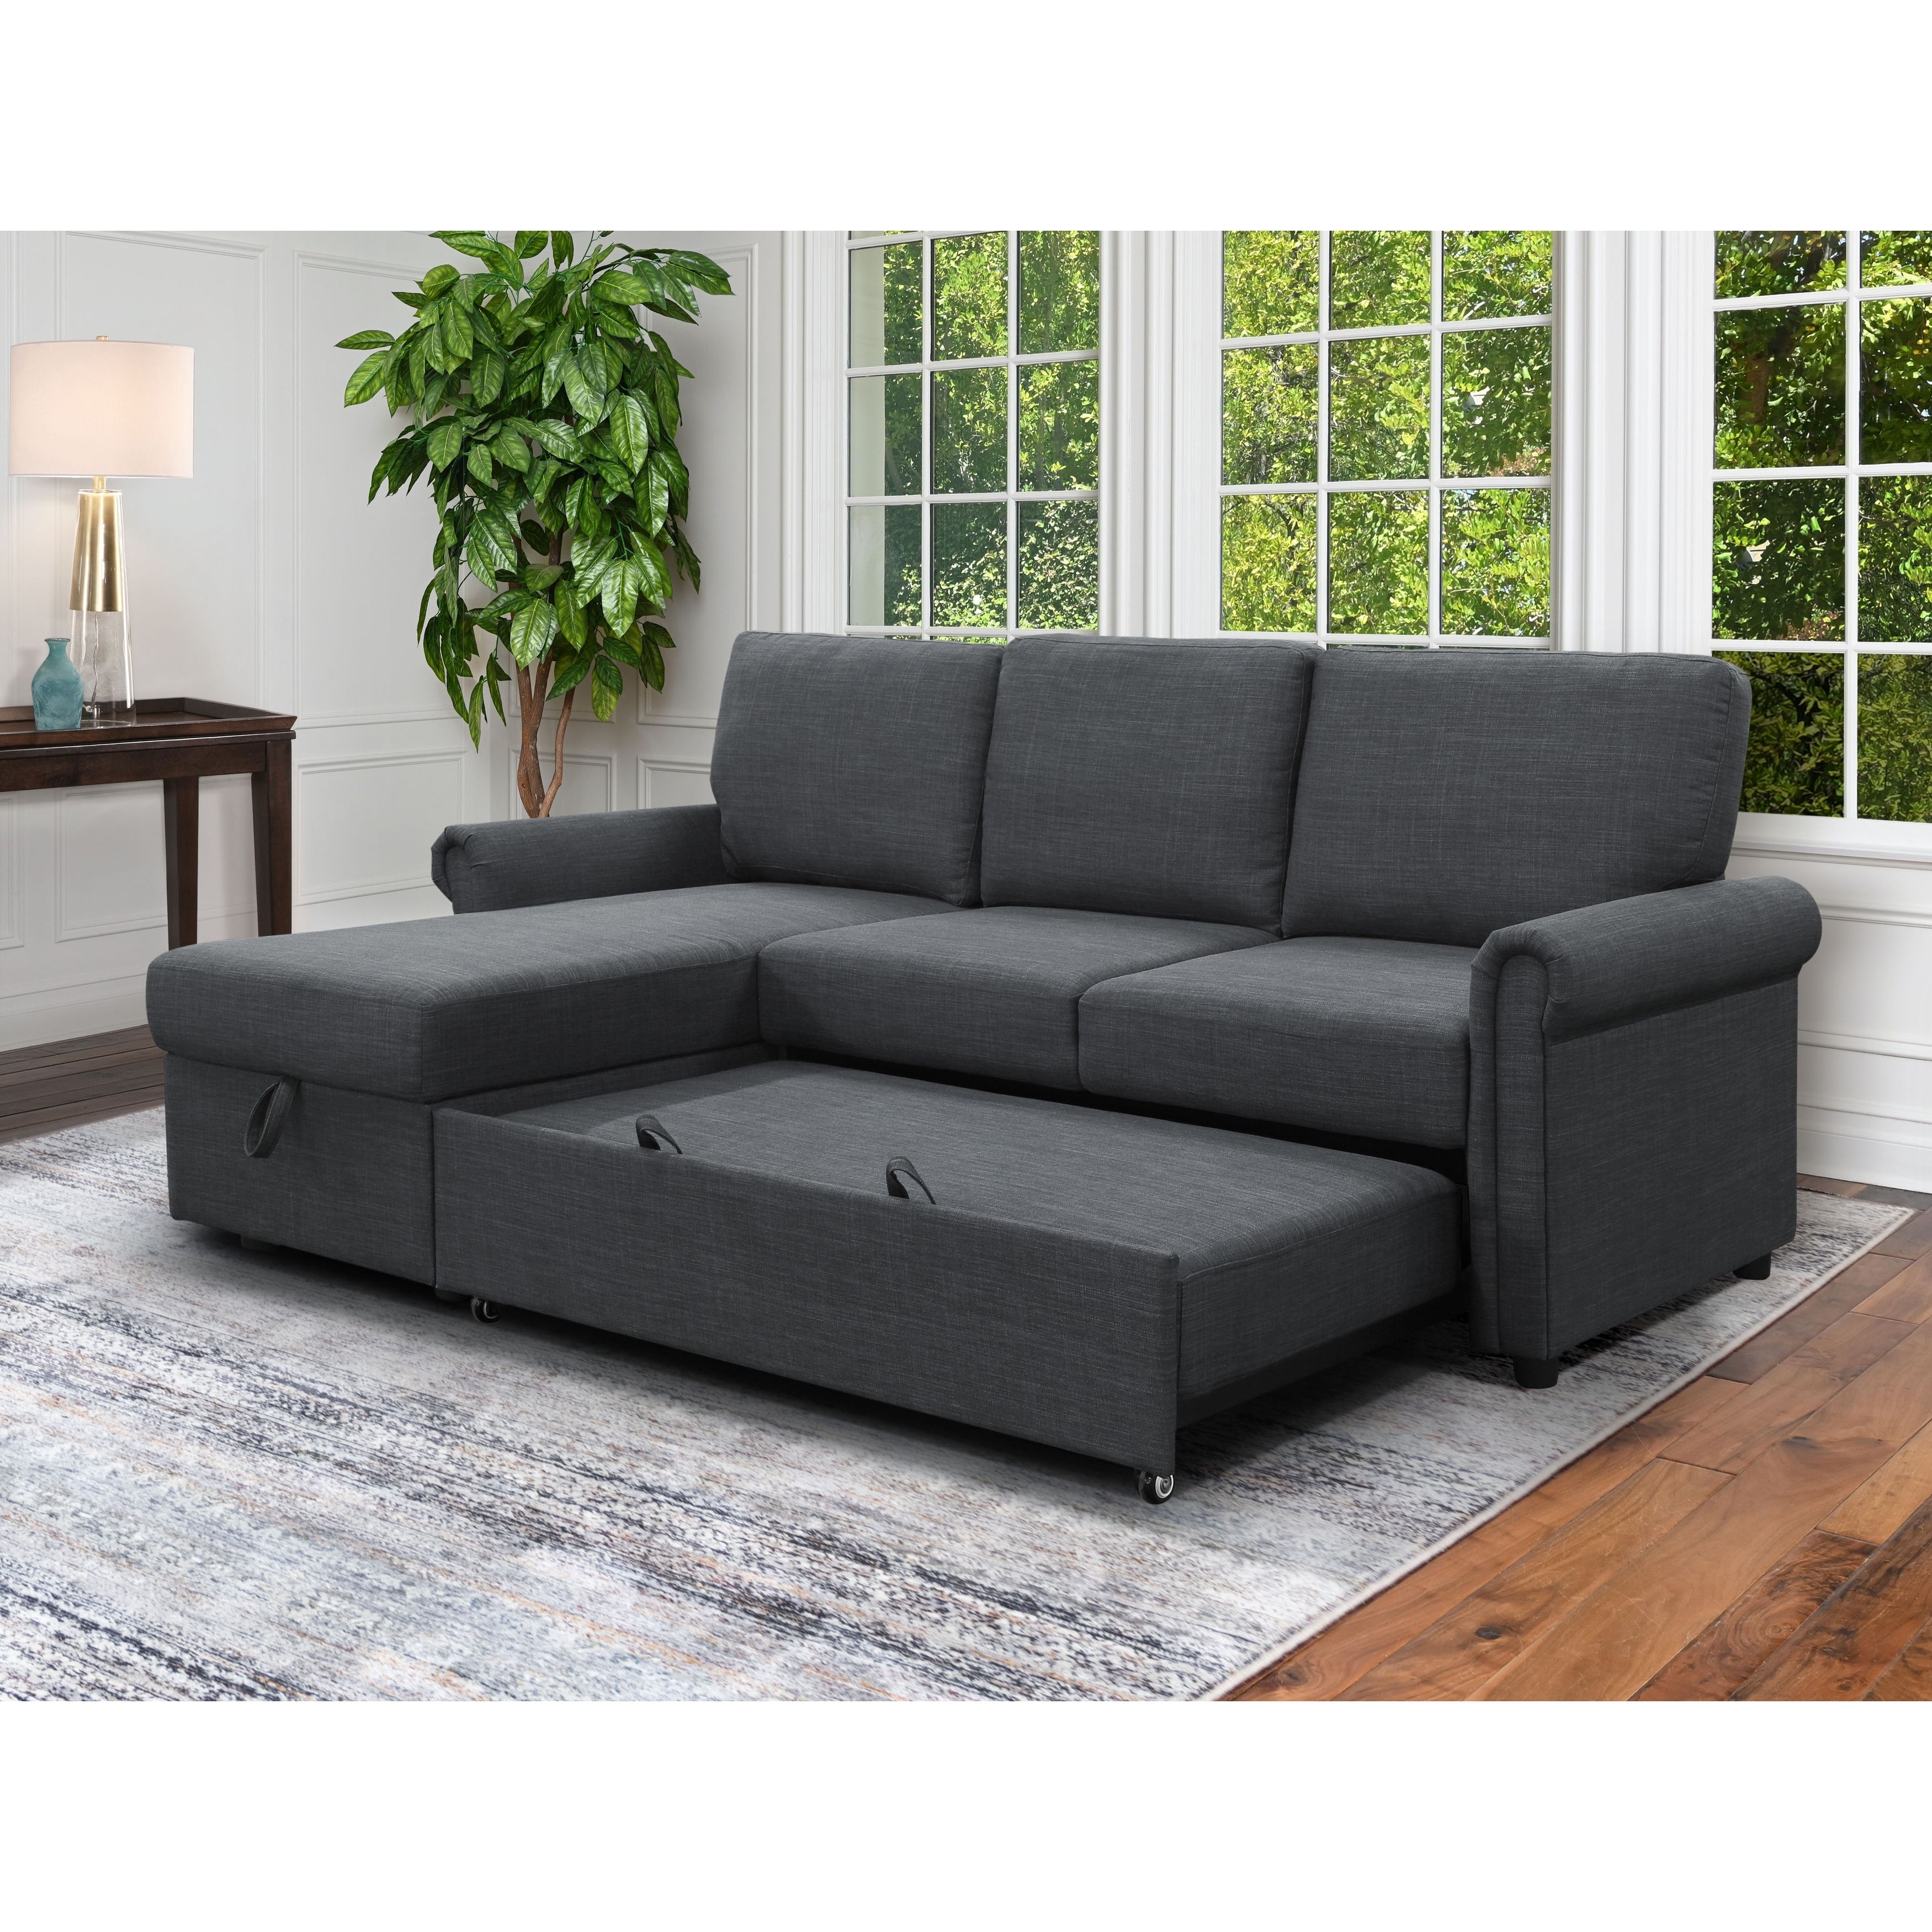 Abbyson Hamilton Reversible Fabric Sleeper Sectional With Storage – –  31997945 Regarding Sectional Sofa With Storage (View 16 of 20)